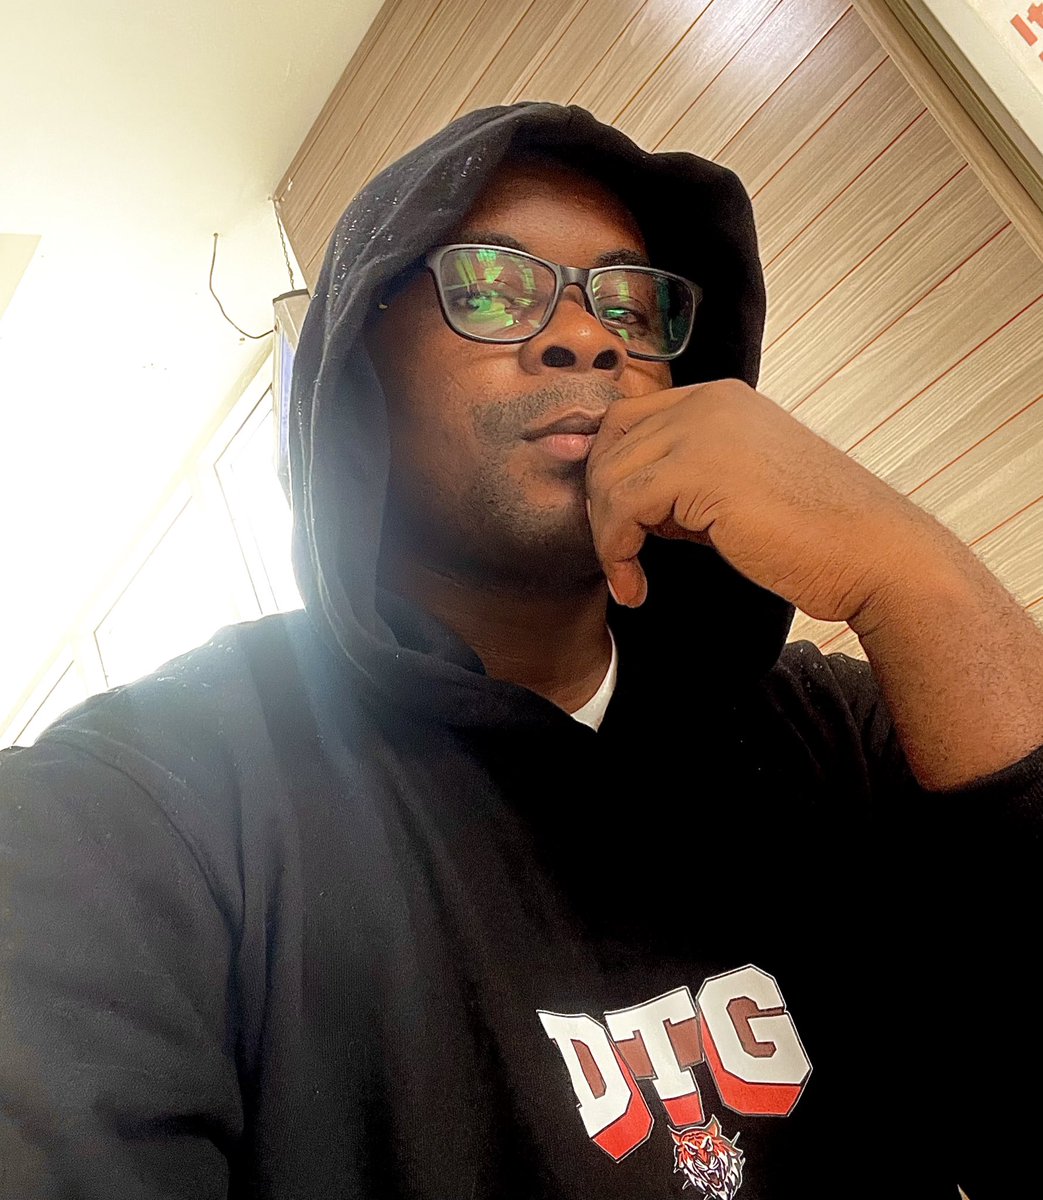 Tigers in CTNG Gather here!!

Flaunt a photo of you rocking your @DefiTigertoken Merch under this tweet.
Comment or quote retweet!

Lemme start:
$DTG